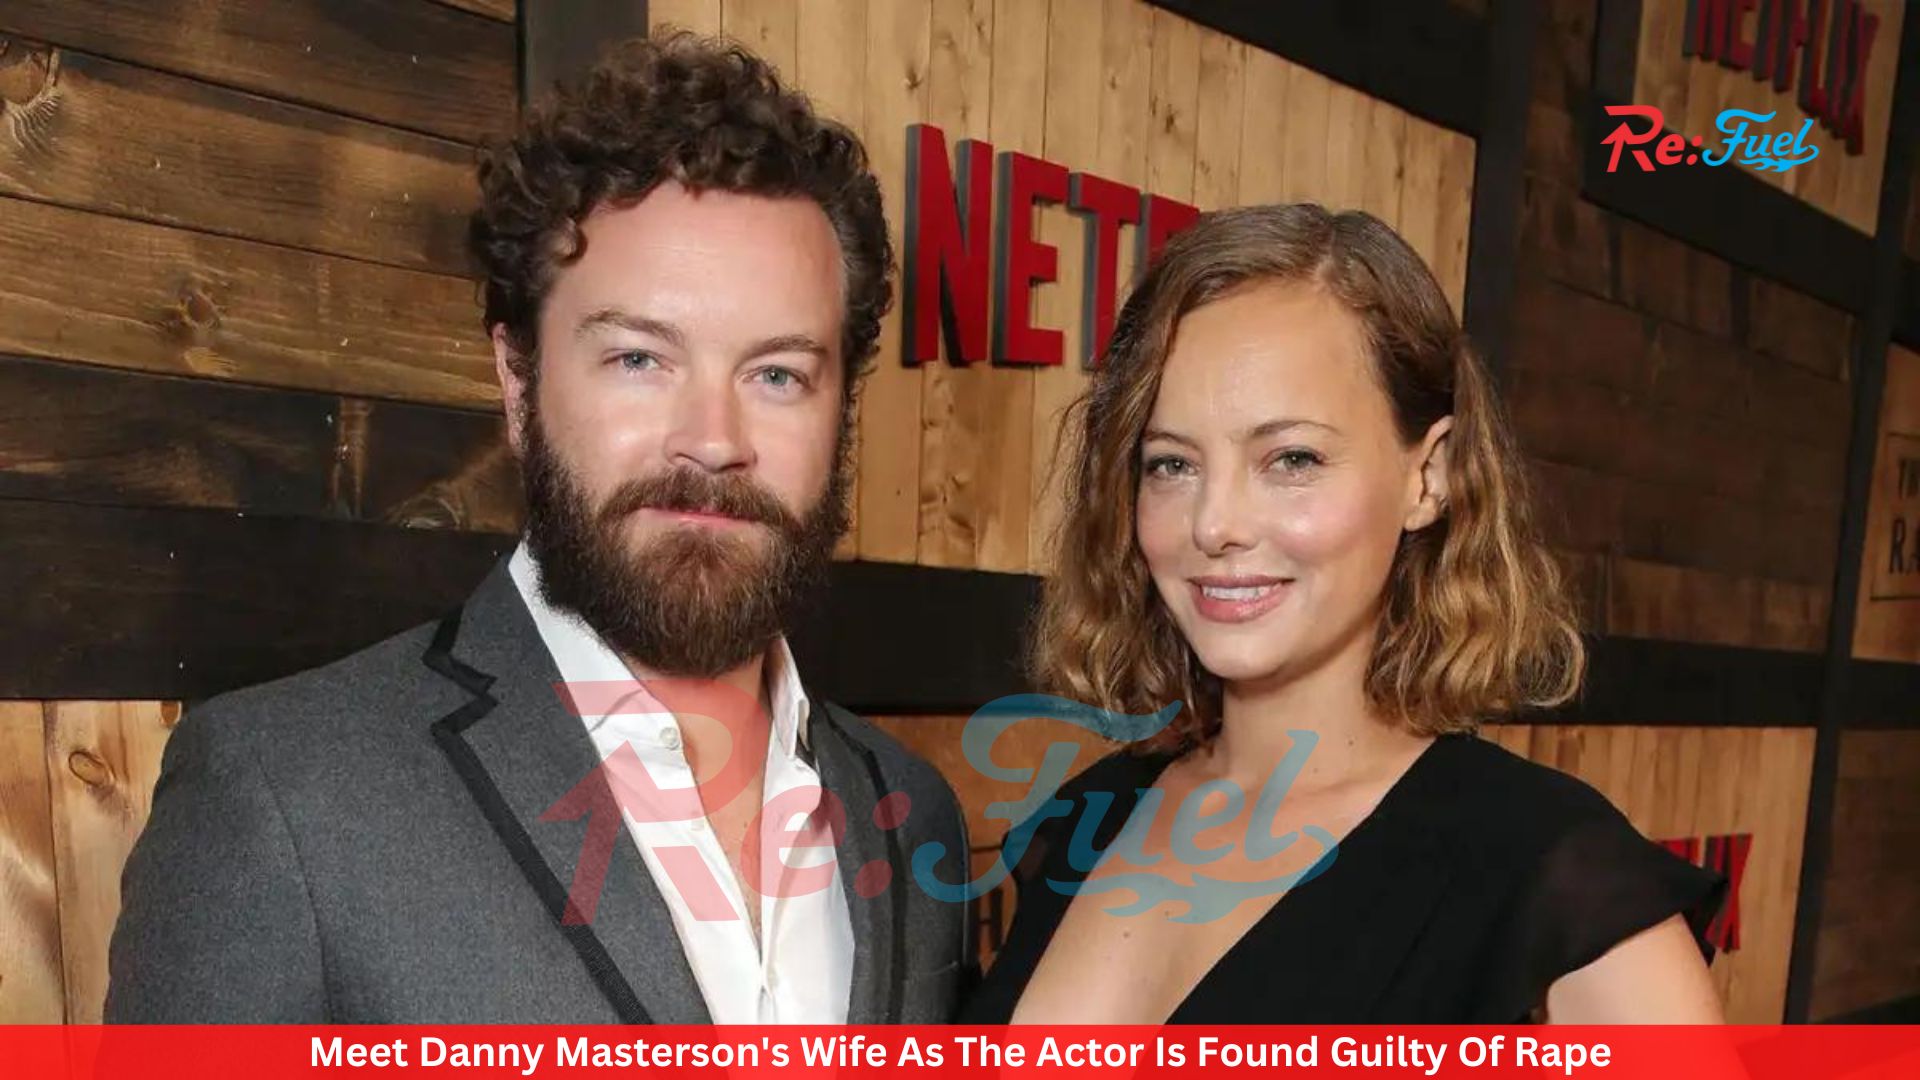 Meet Danny Masterson's Wife As The Actor Is Found Guilty Of Rape